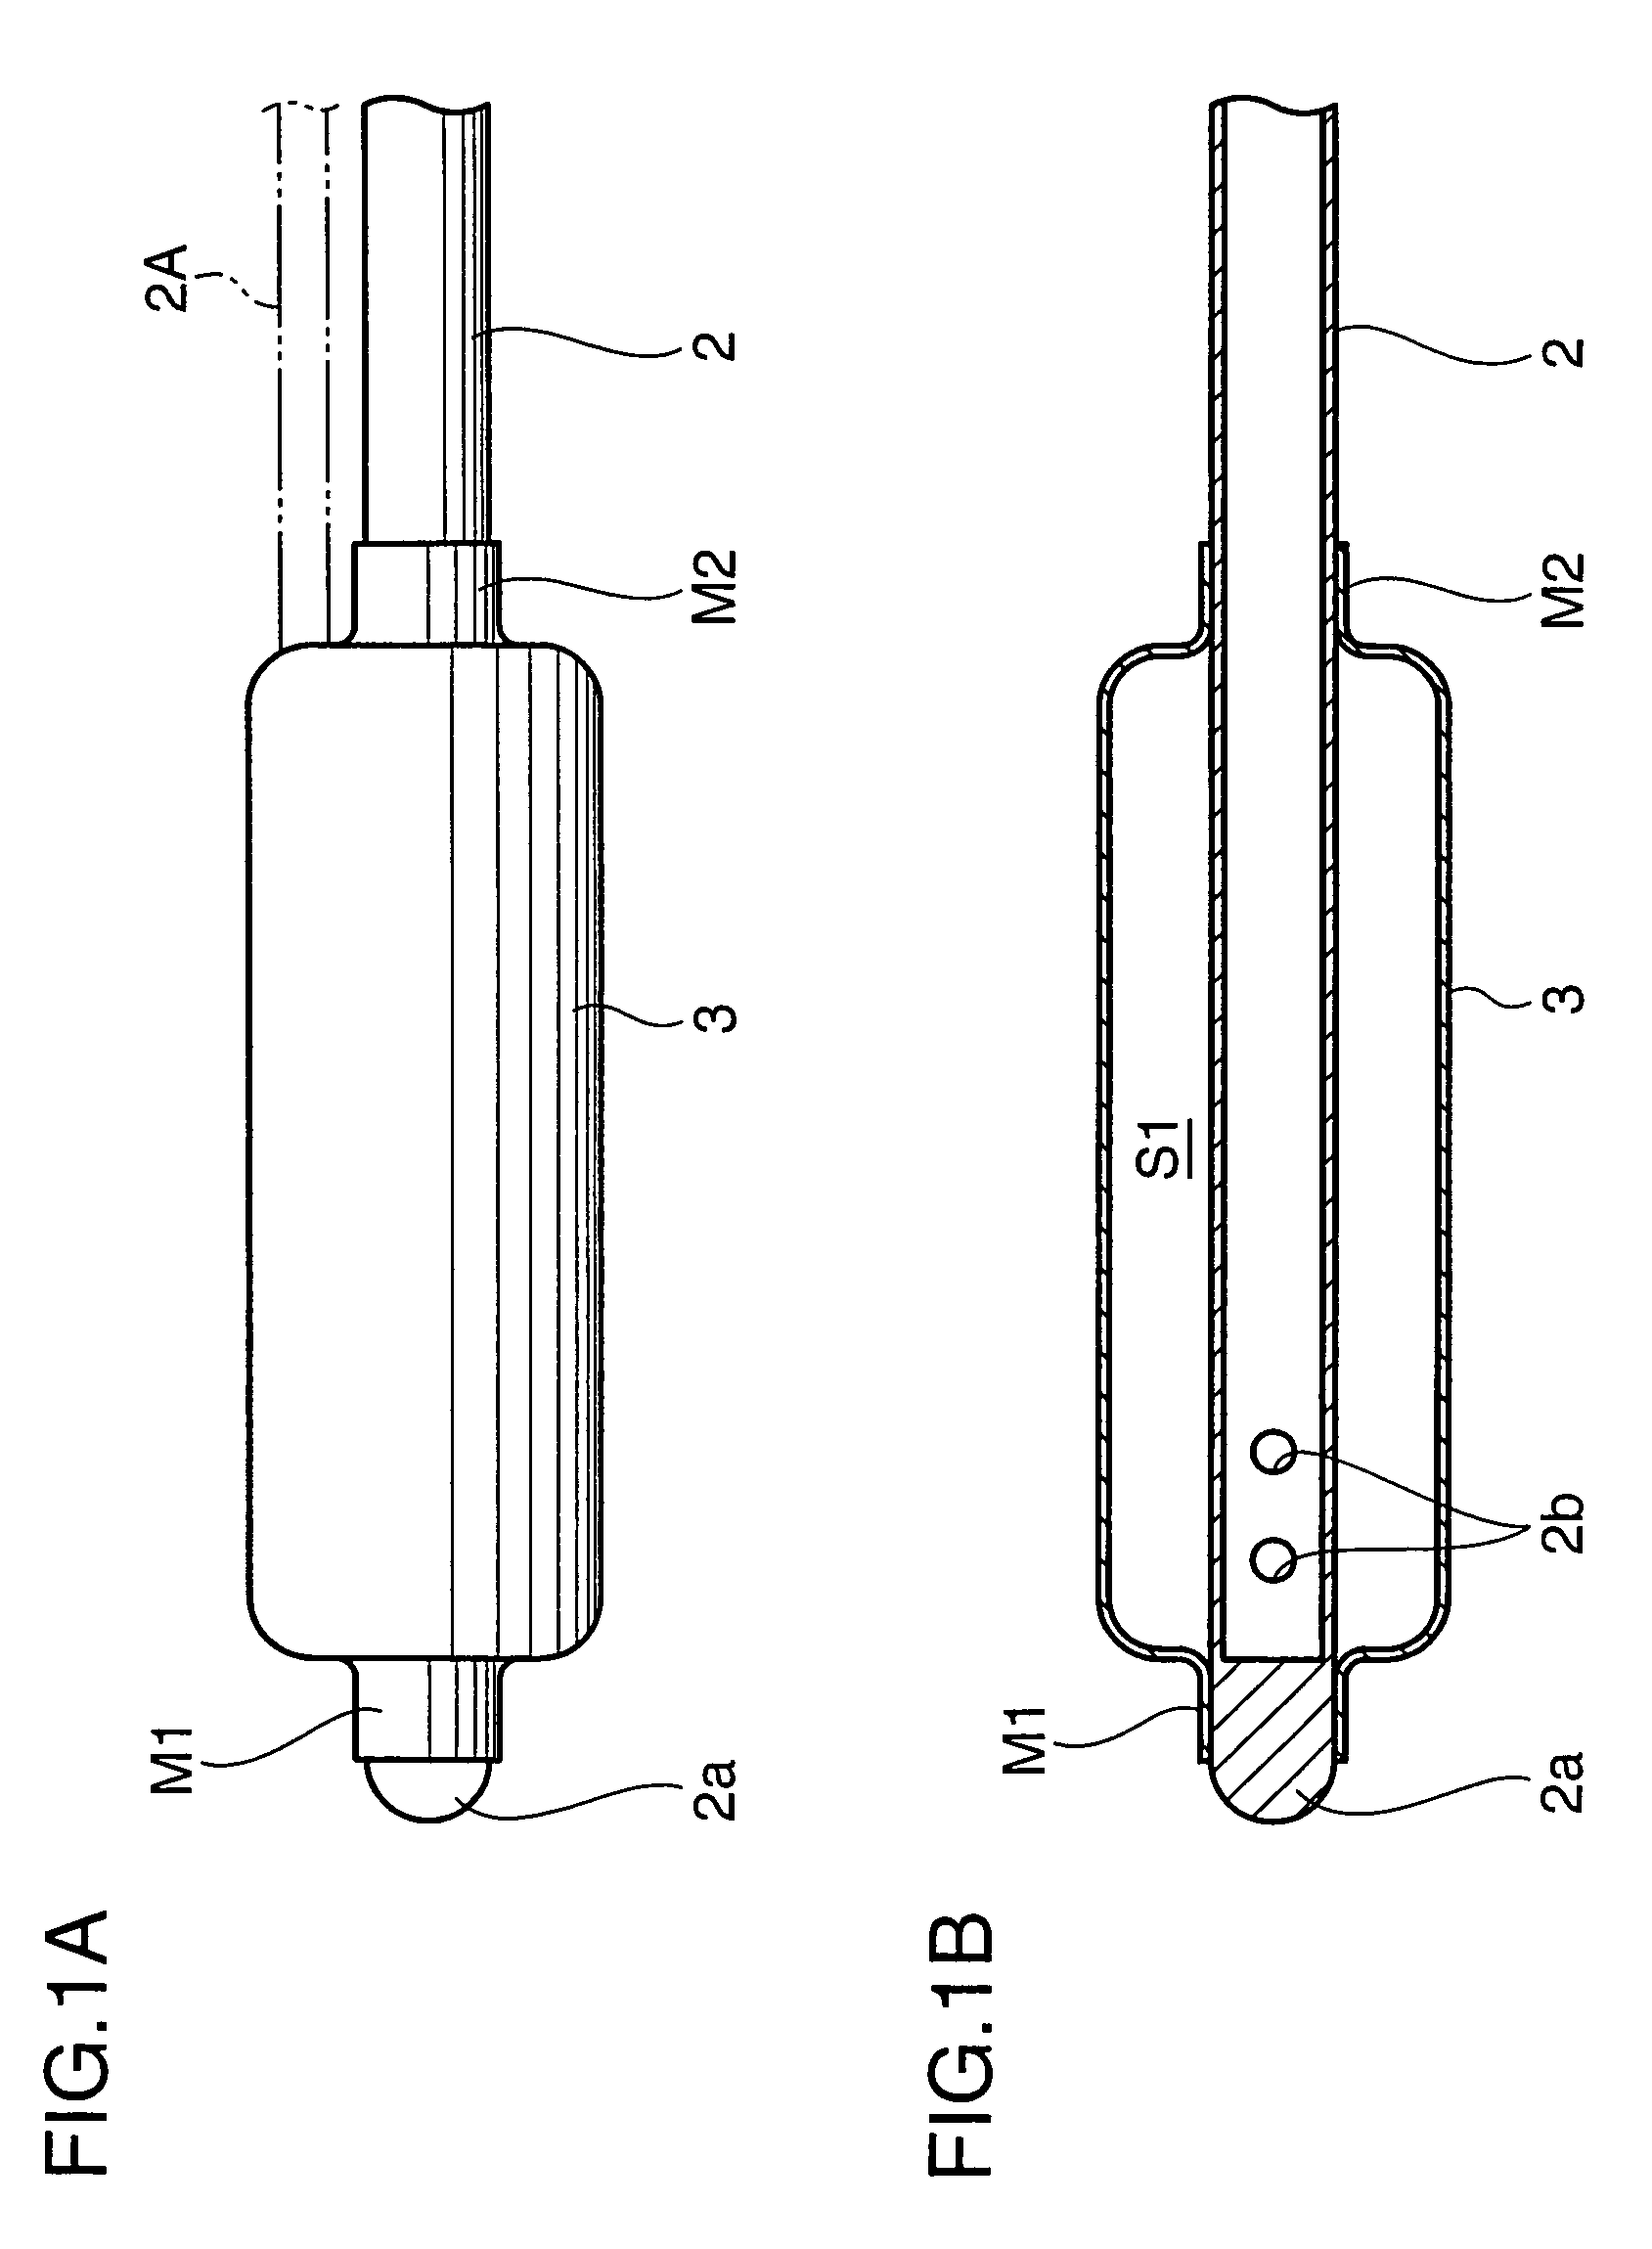 Brain cooling device and brain cooling system comprising the device